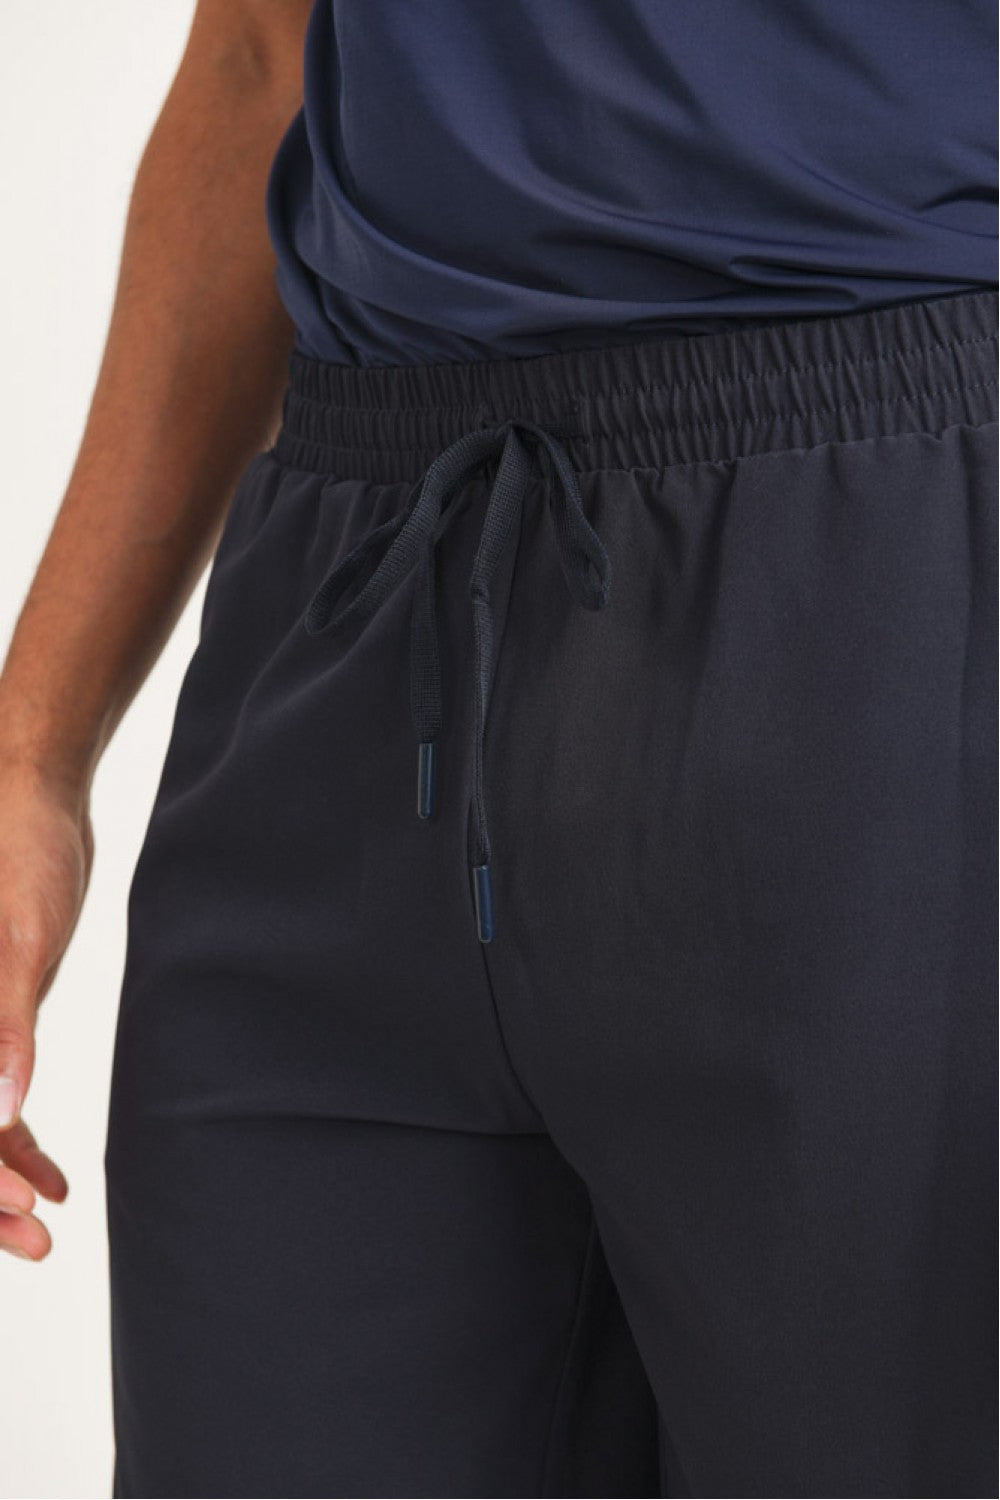 MEN'S - Active Drawstring Shorts with Zippered Pouch - Navy